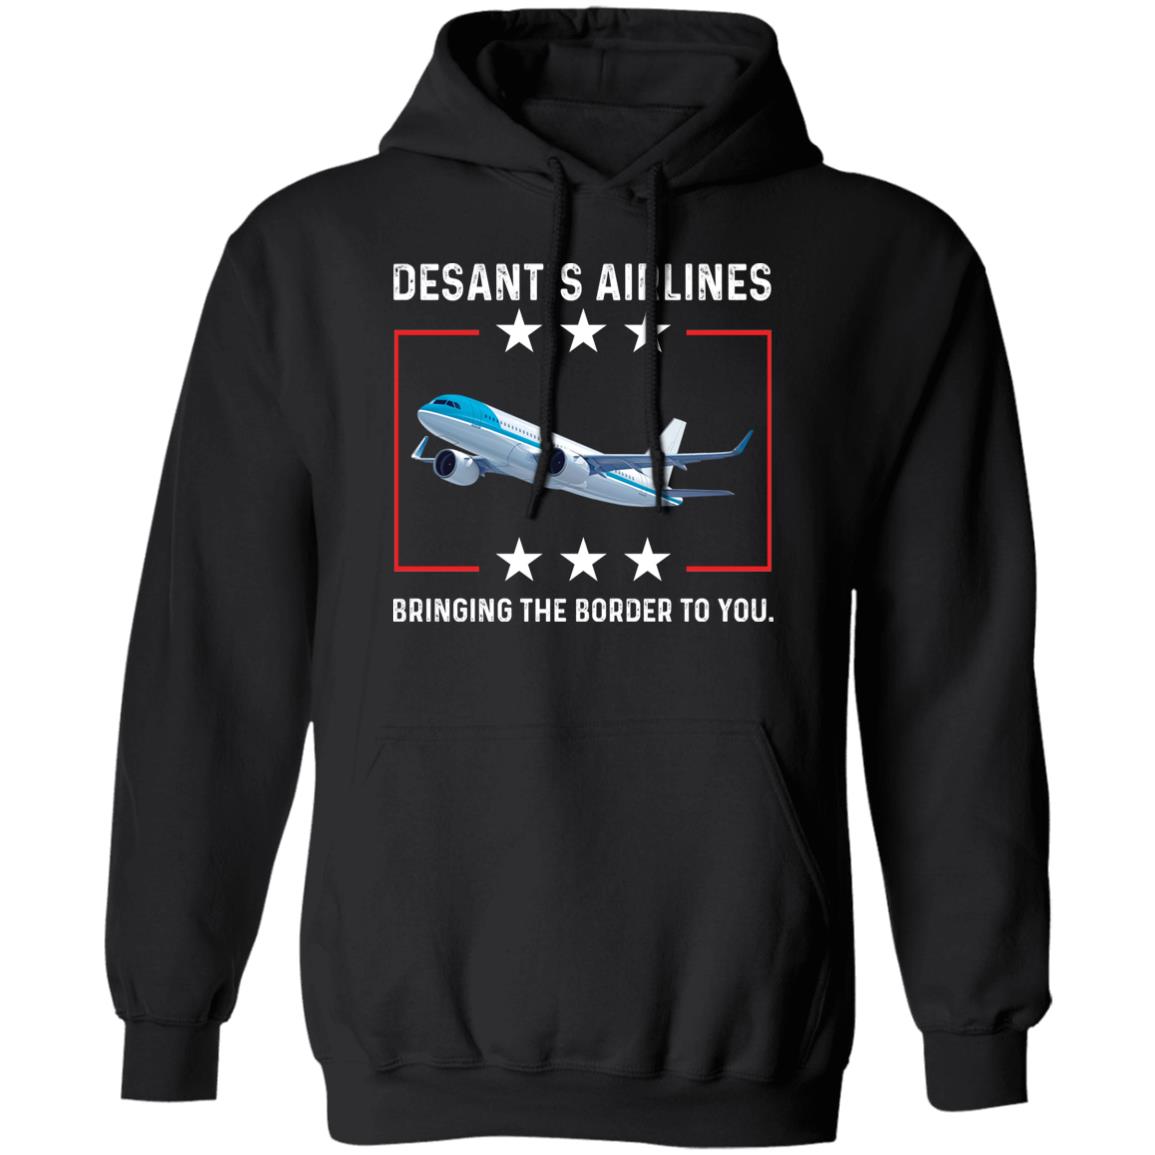 Desantis Airlines Bringing The Border To You Shirt Panetory – Graphic Design Apparel &Amp; Accessories Online